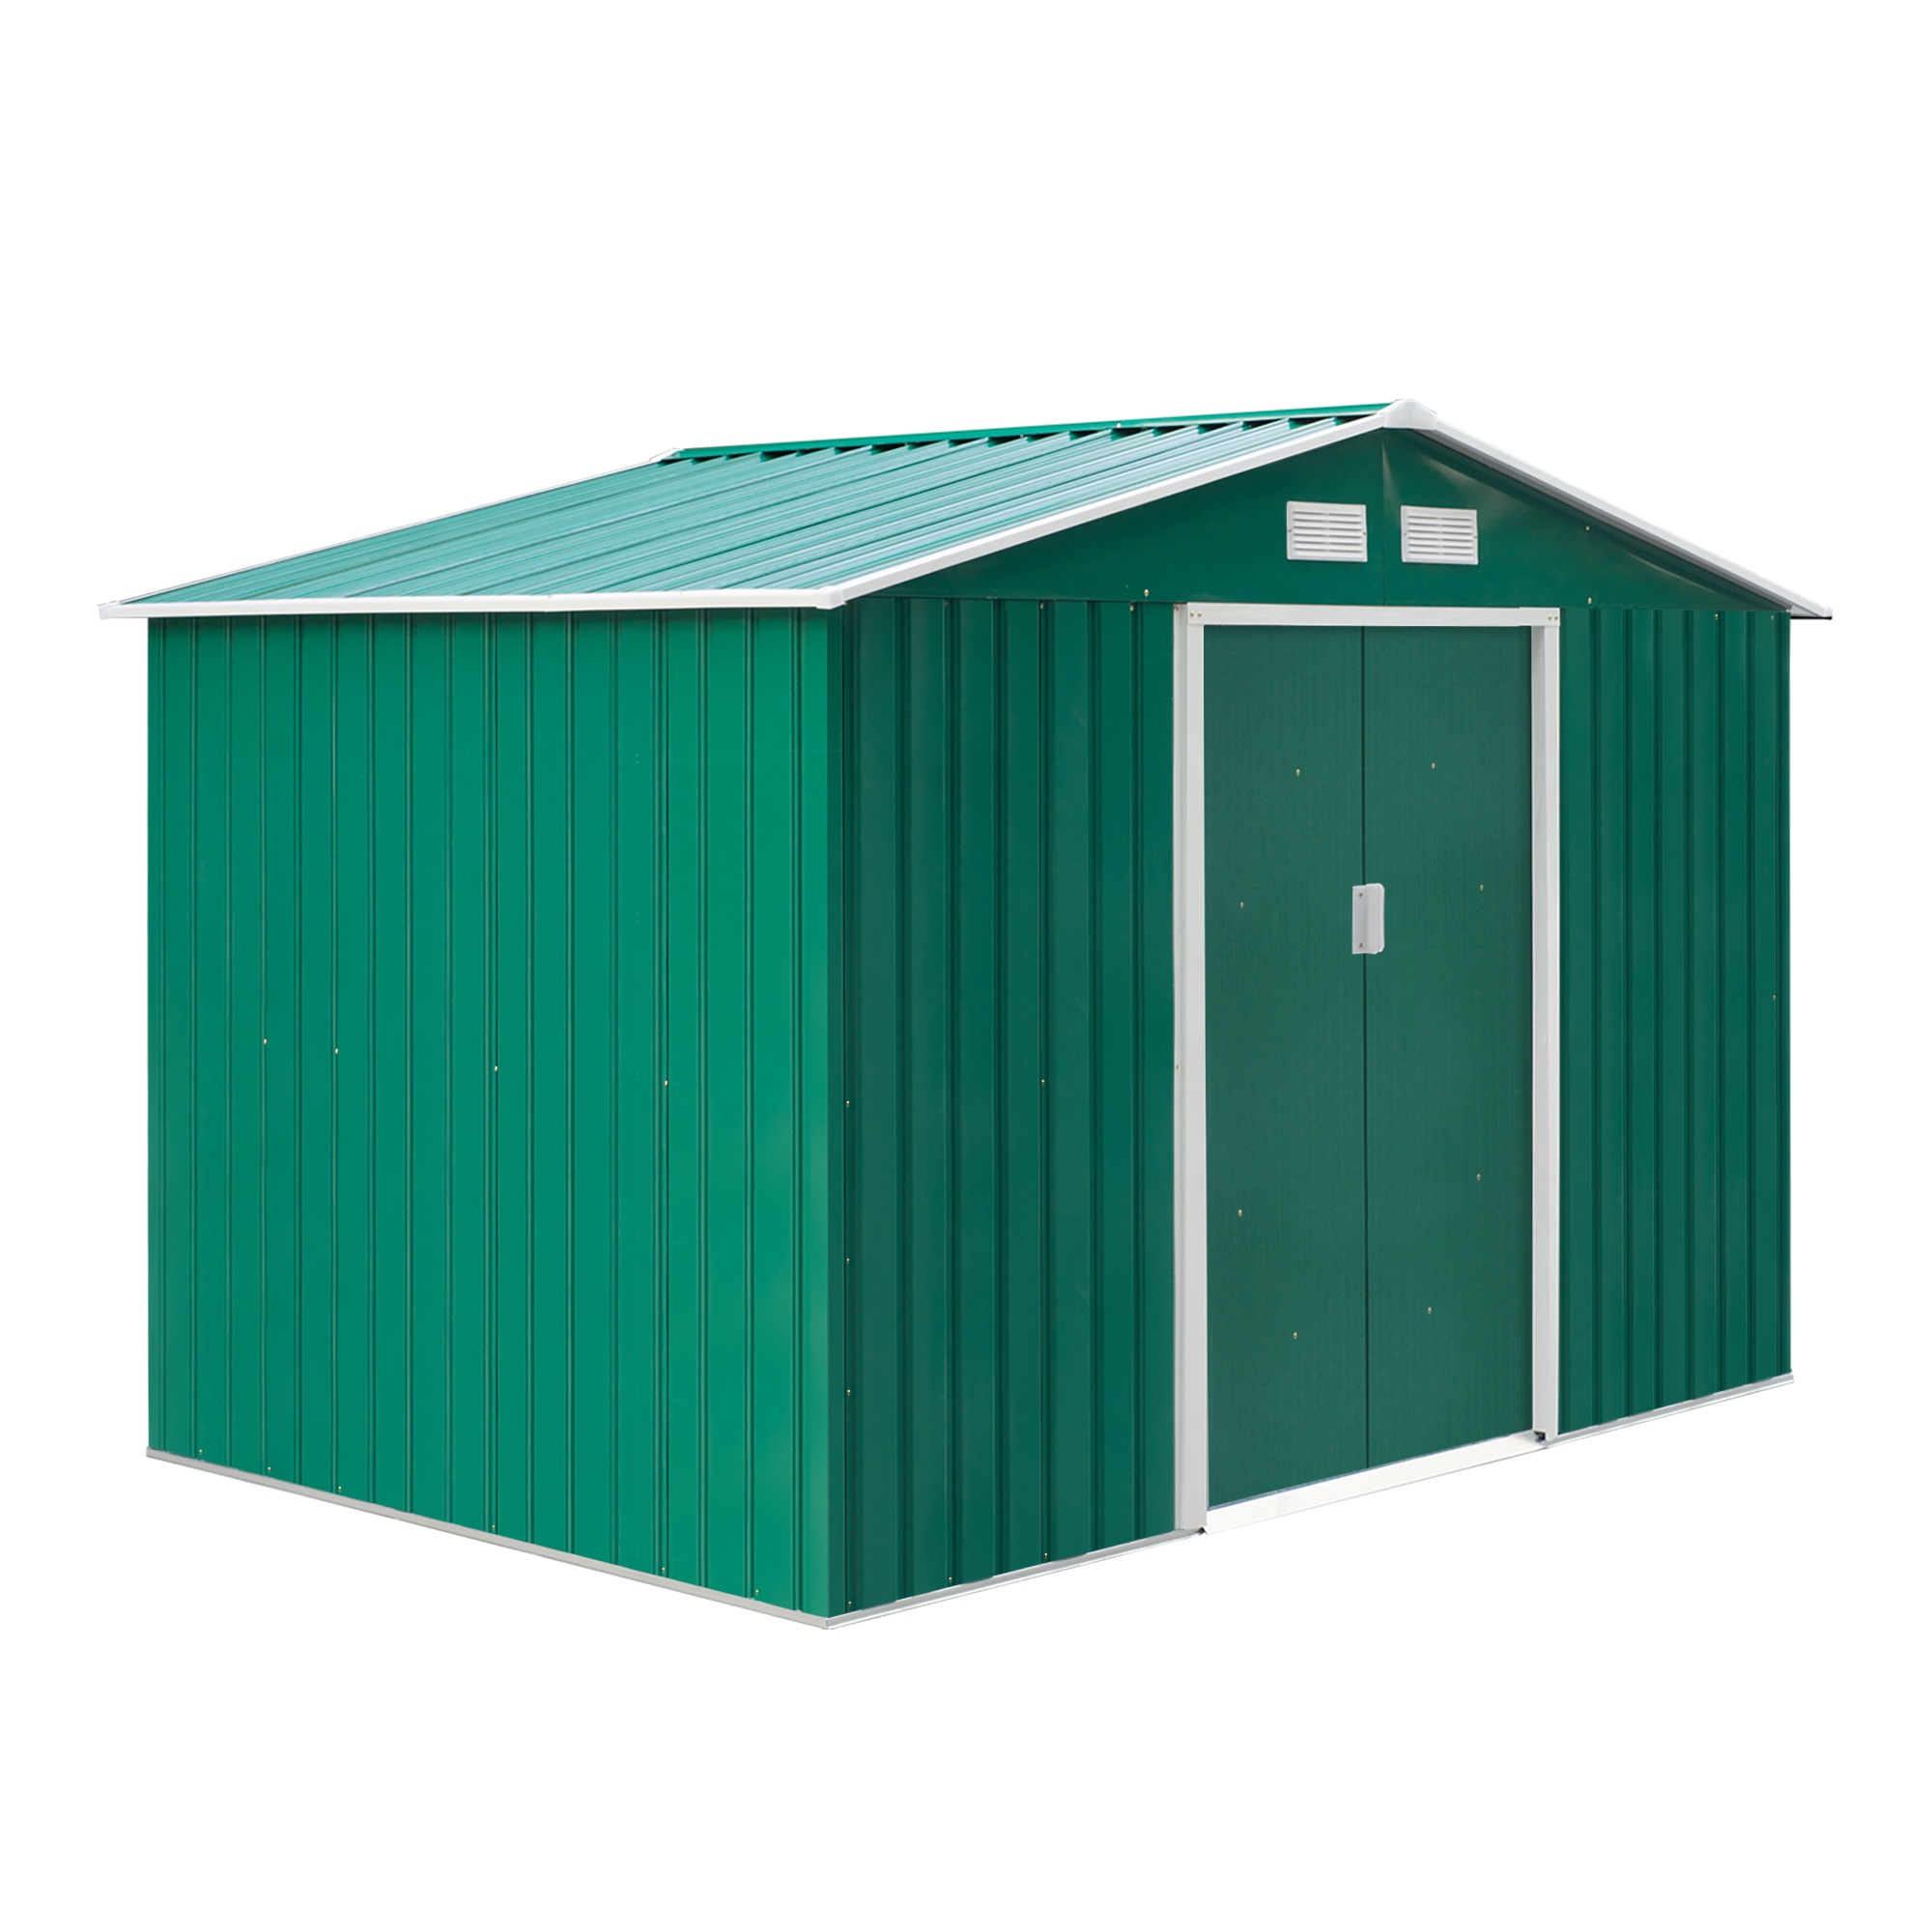 Outsunny Garden Shed Εργαλειοθήκη σε Ατσάλι